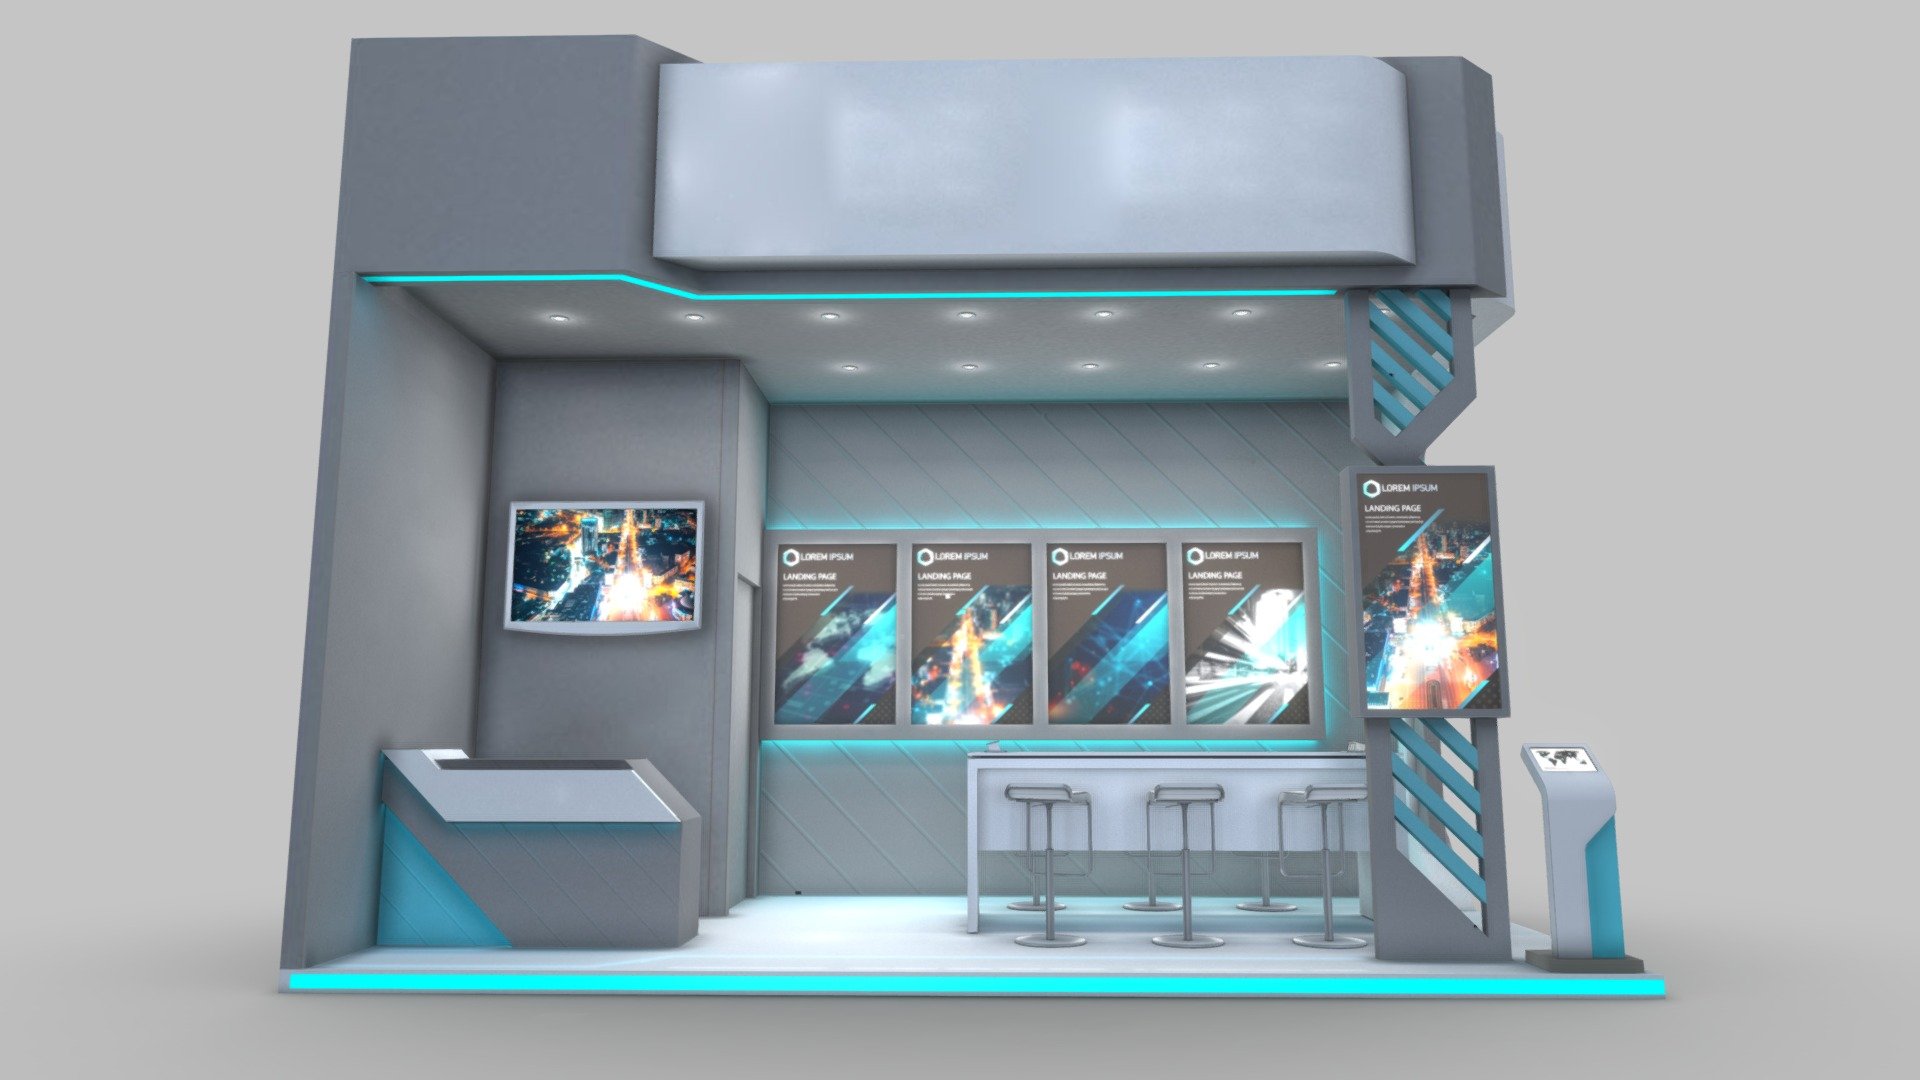 Hi.... This is Exhibition stand design 
used for the purposes of promoting services and goods at a pameman event

This model has set in autodesk 3Ds max 2018 _ V-ray Adv 3.60.03
area of the Exhibition design is 18 sqm (6x3m) - 2 open sides view
maximum height is H+4.50

Unit setup - 1.0 - centimeters
File Include: maptexture

Additional file:
Exhibition stand design 6x3m - autodesk 3ds max 2018 - Exhibition Stand 6x3m Brq - Buy Royalty Free 3D model by fasih.lisan 3d model